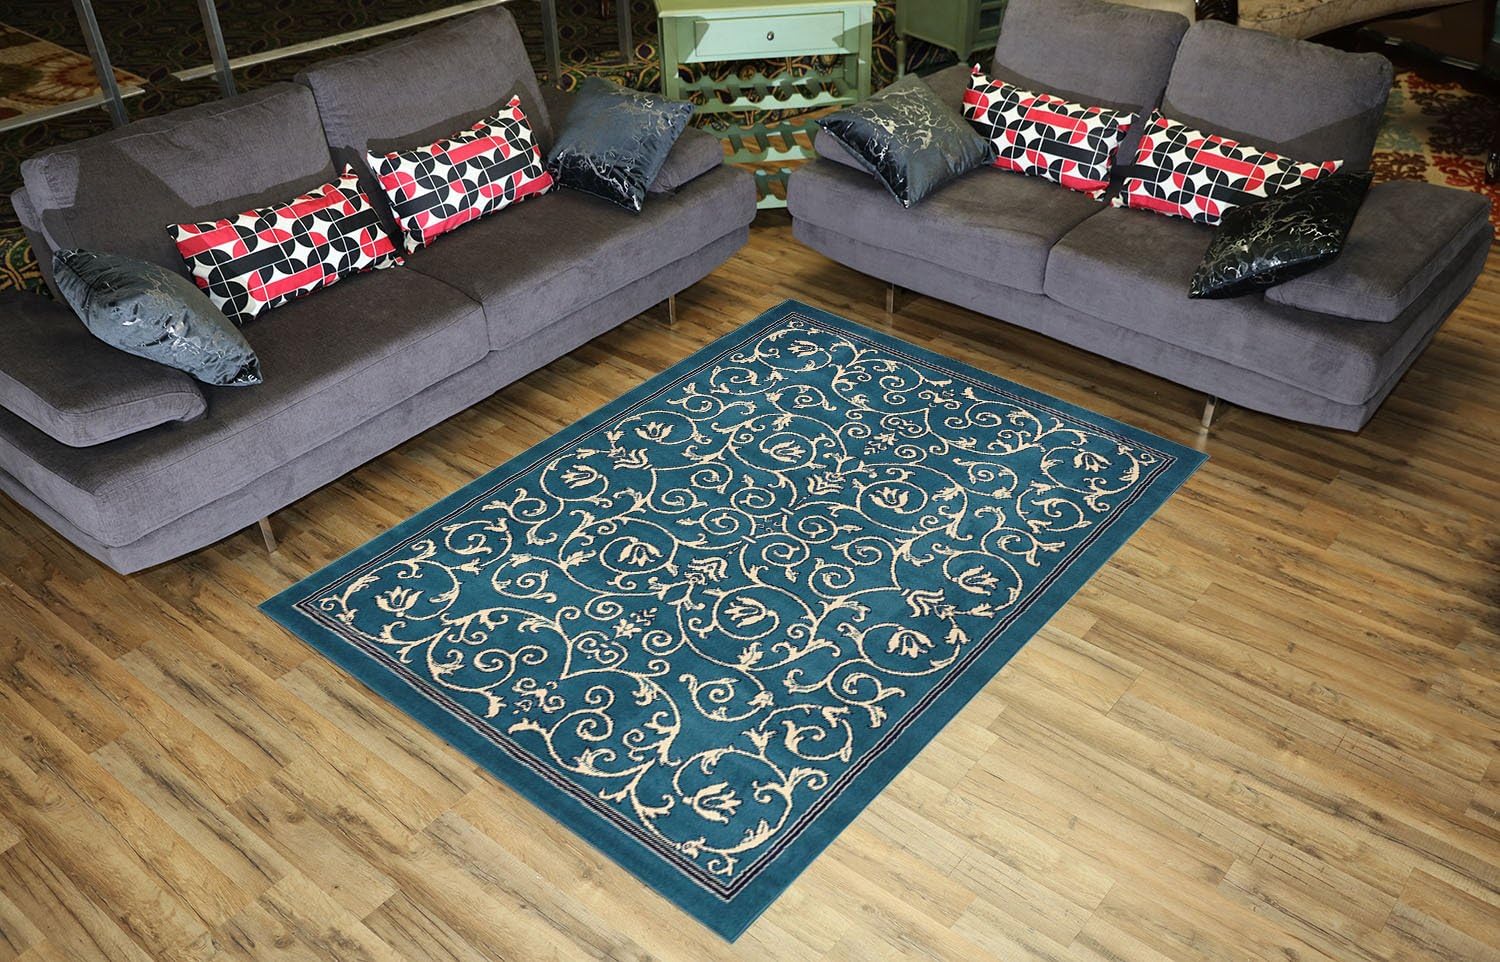 Conur Collection Floral Scroll Area Rug Rugs Modern Contemporary Traditional Area Rug (Petrol Blue, 4'11" x 6'11") - 0